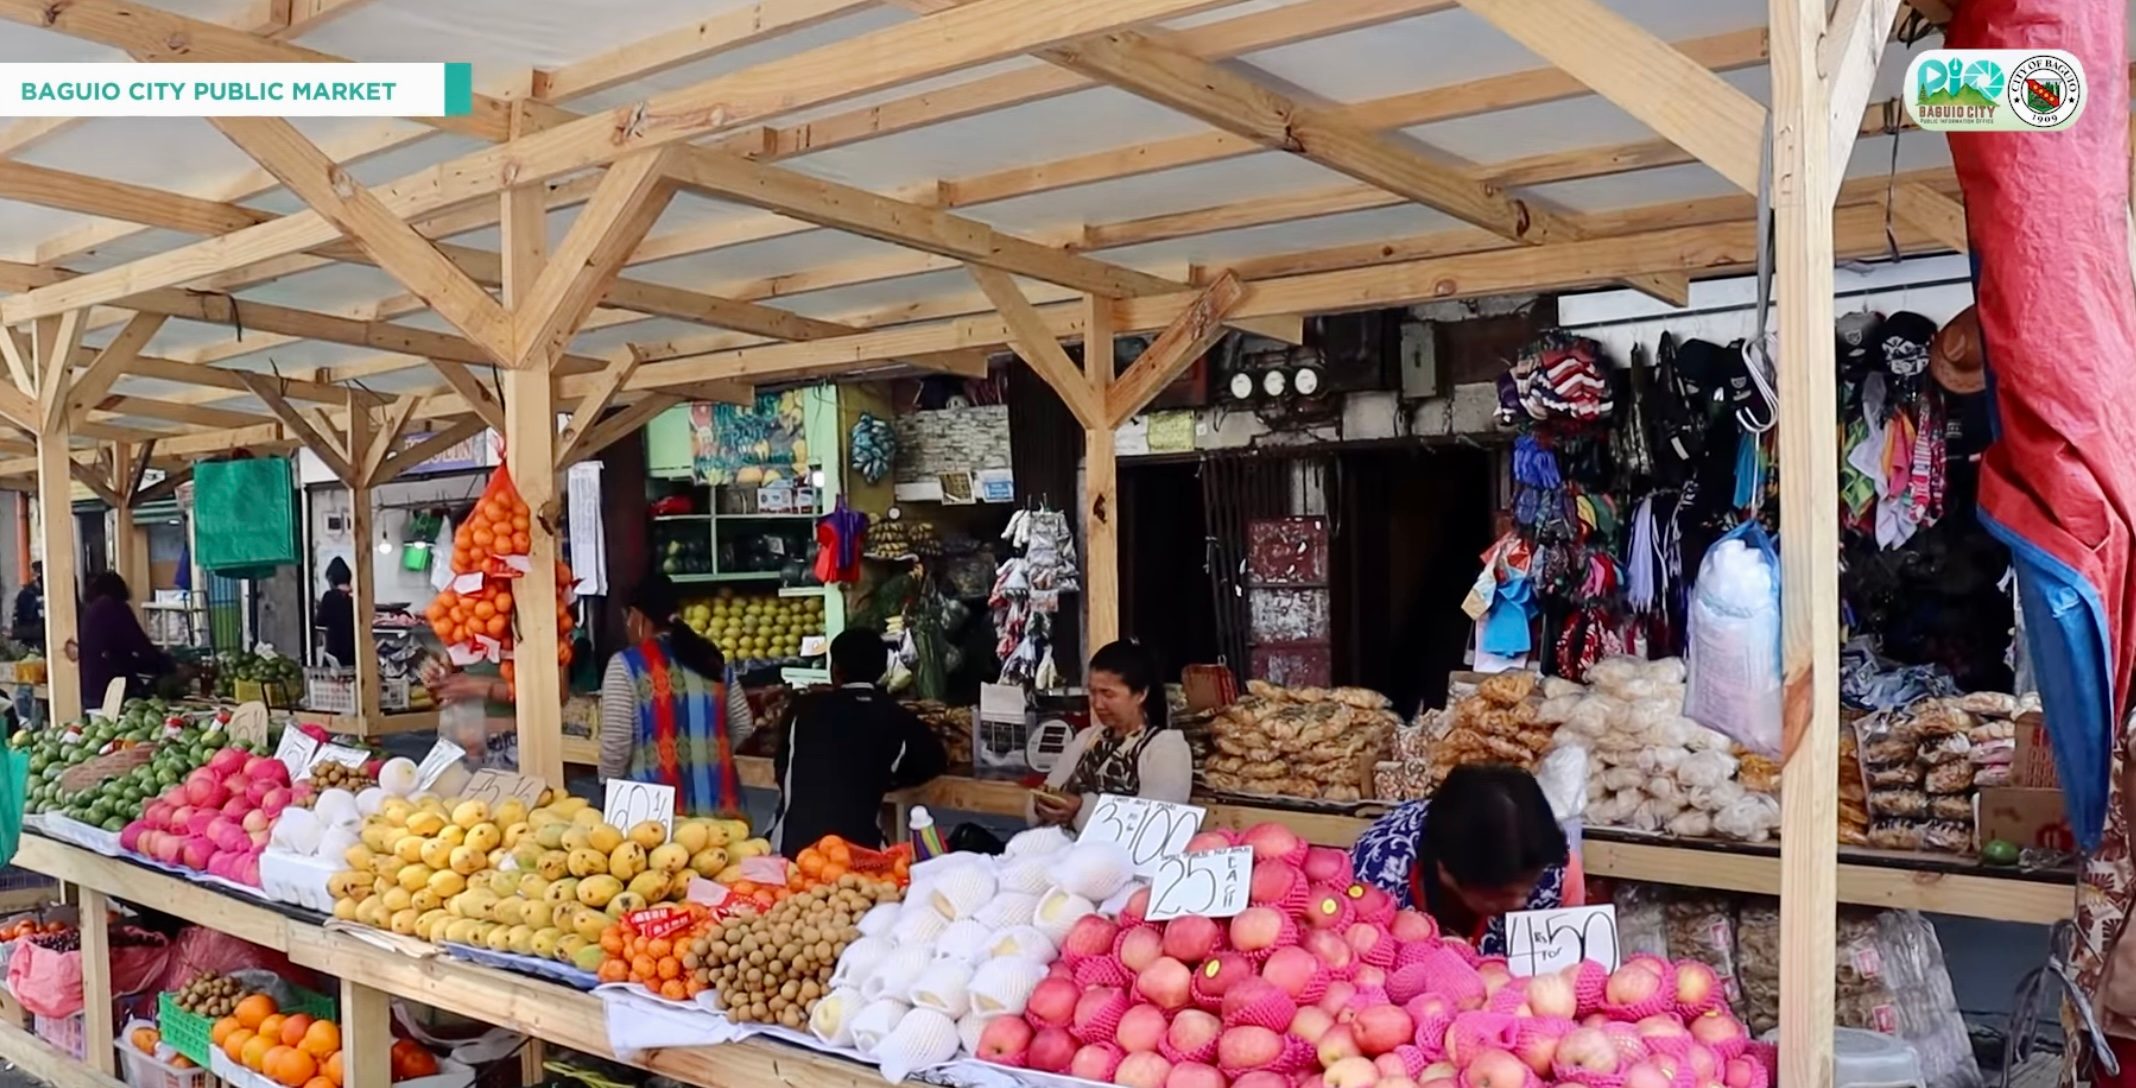 Swift clean-up after fire allows Baguio market stall owners’ early return